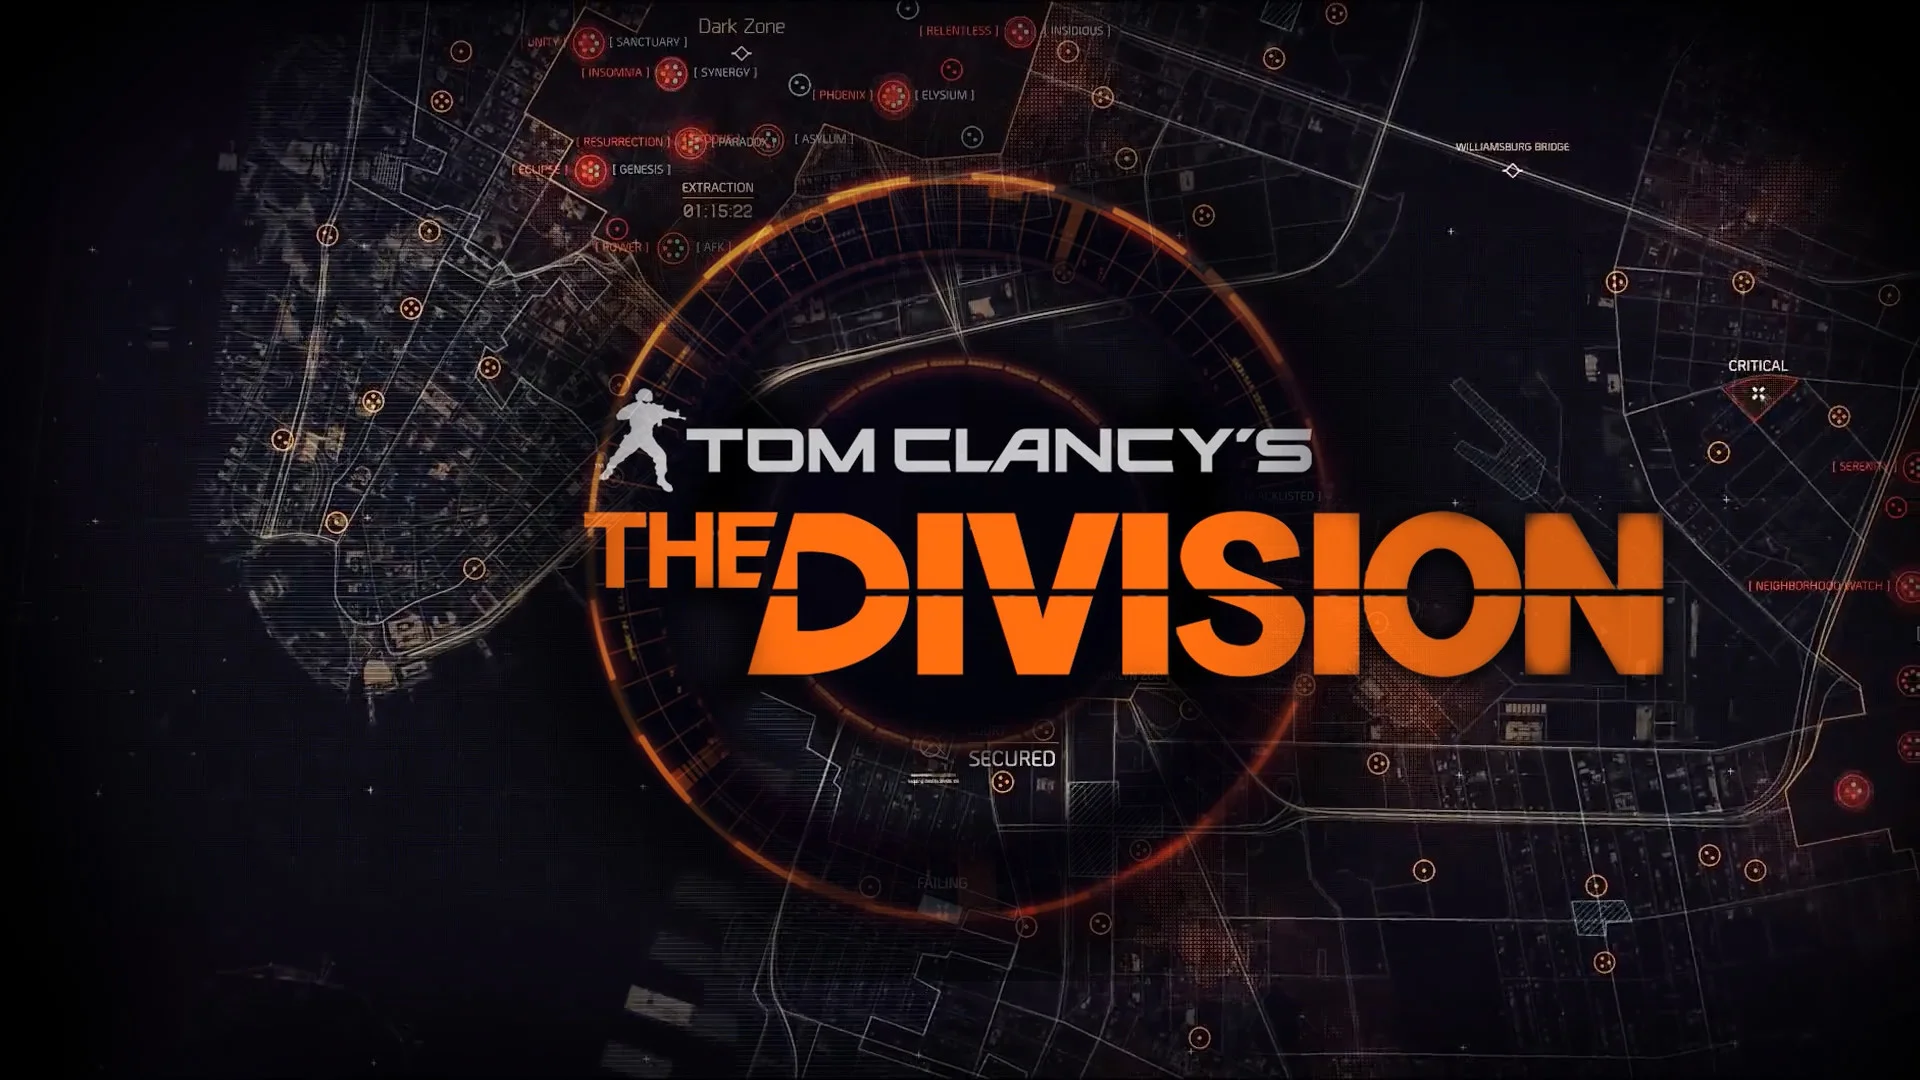 Tom Clancy's The Division Computer Wallpaper